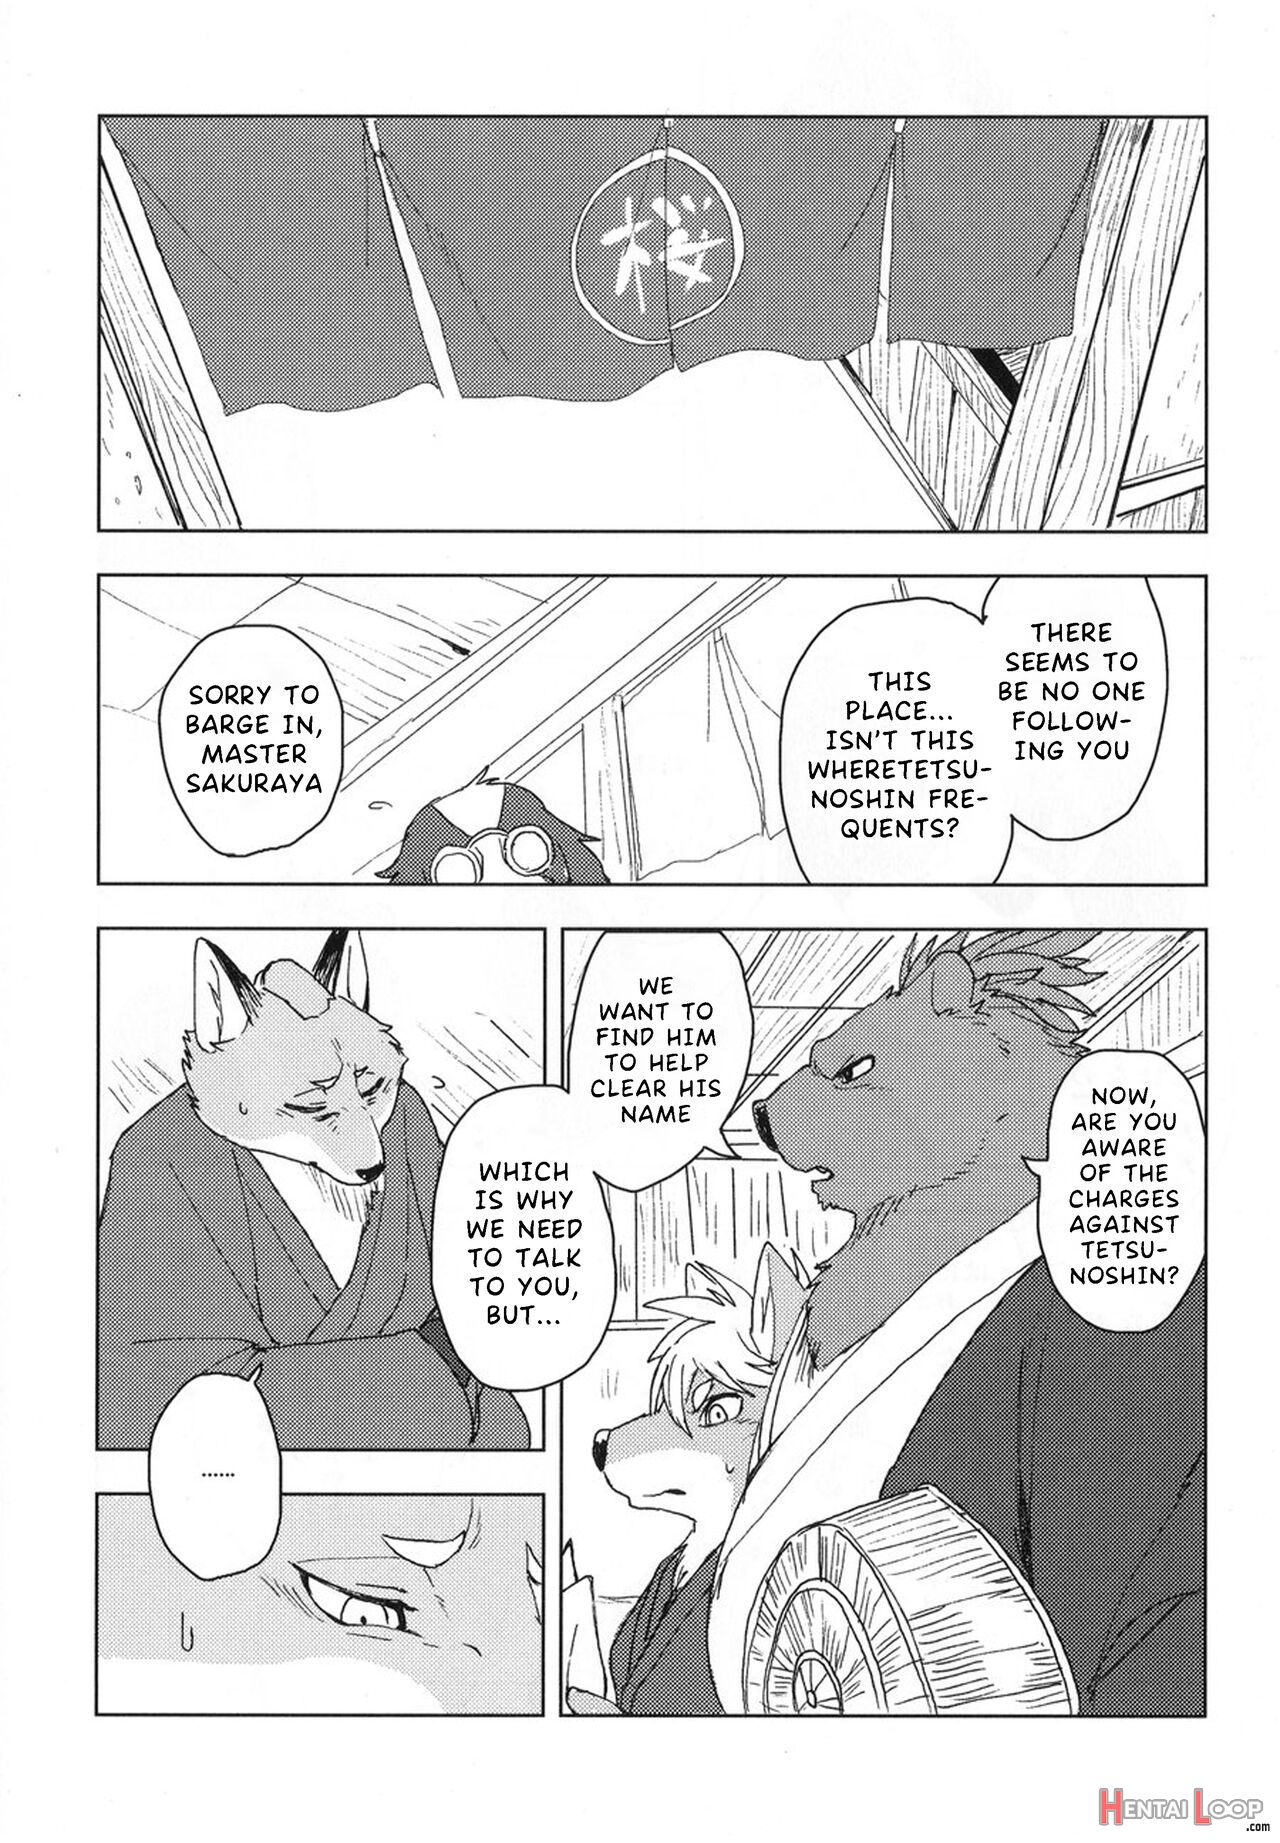 The Bellow Of The Bells - 3 page 4